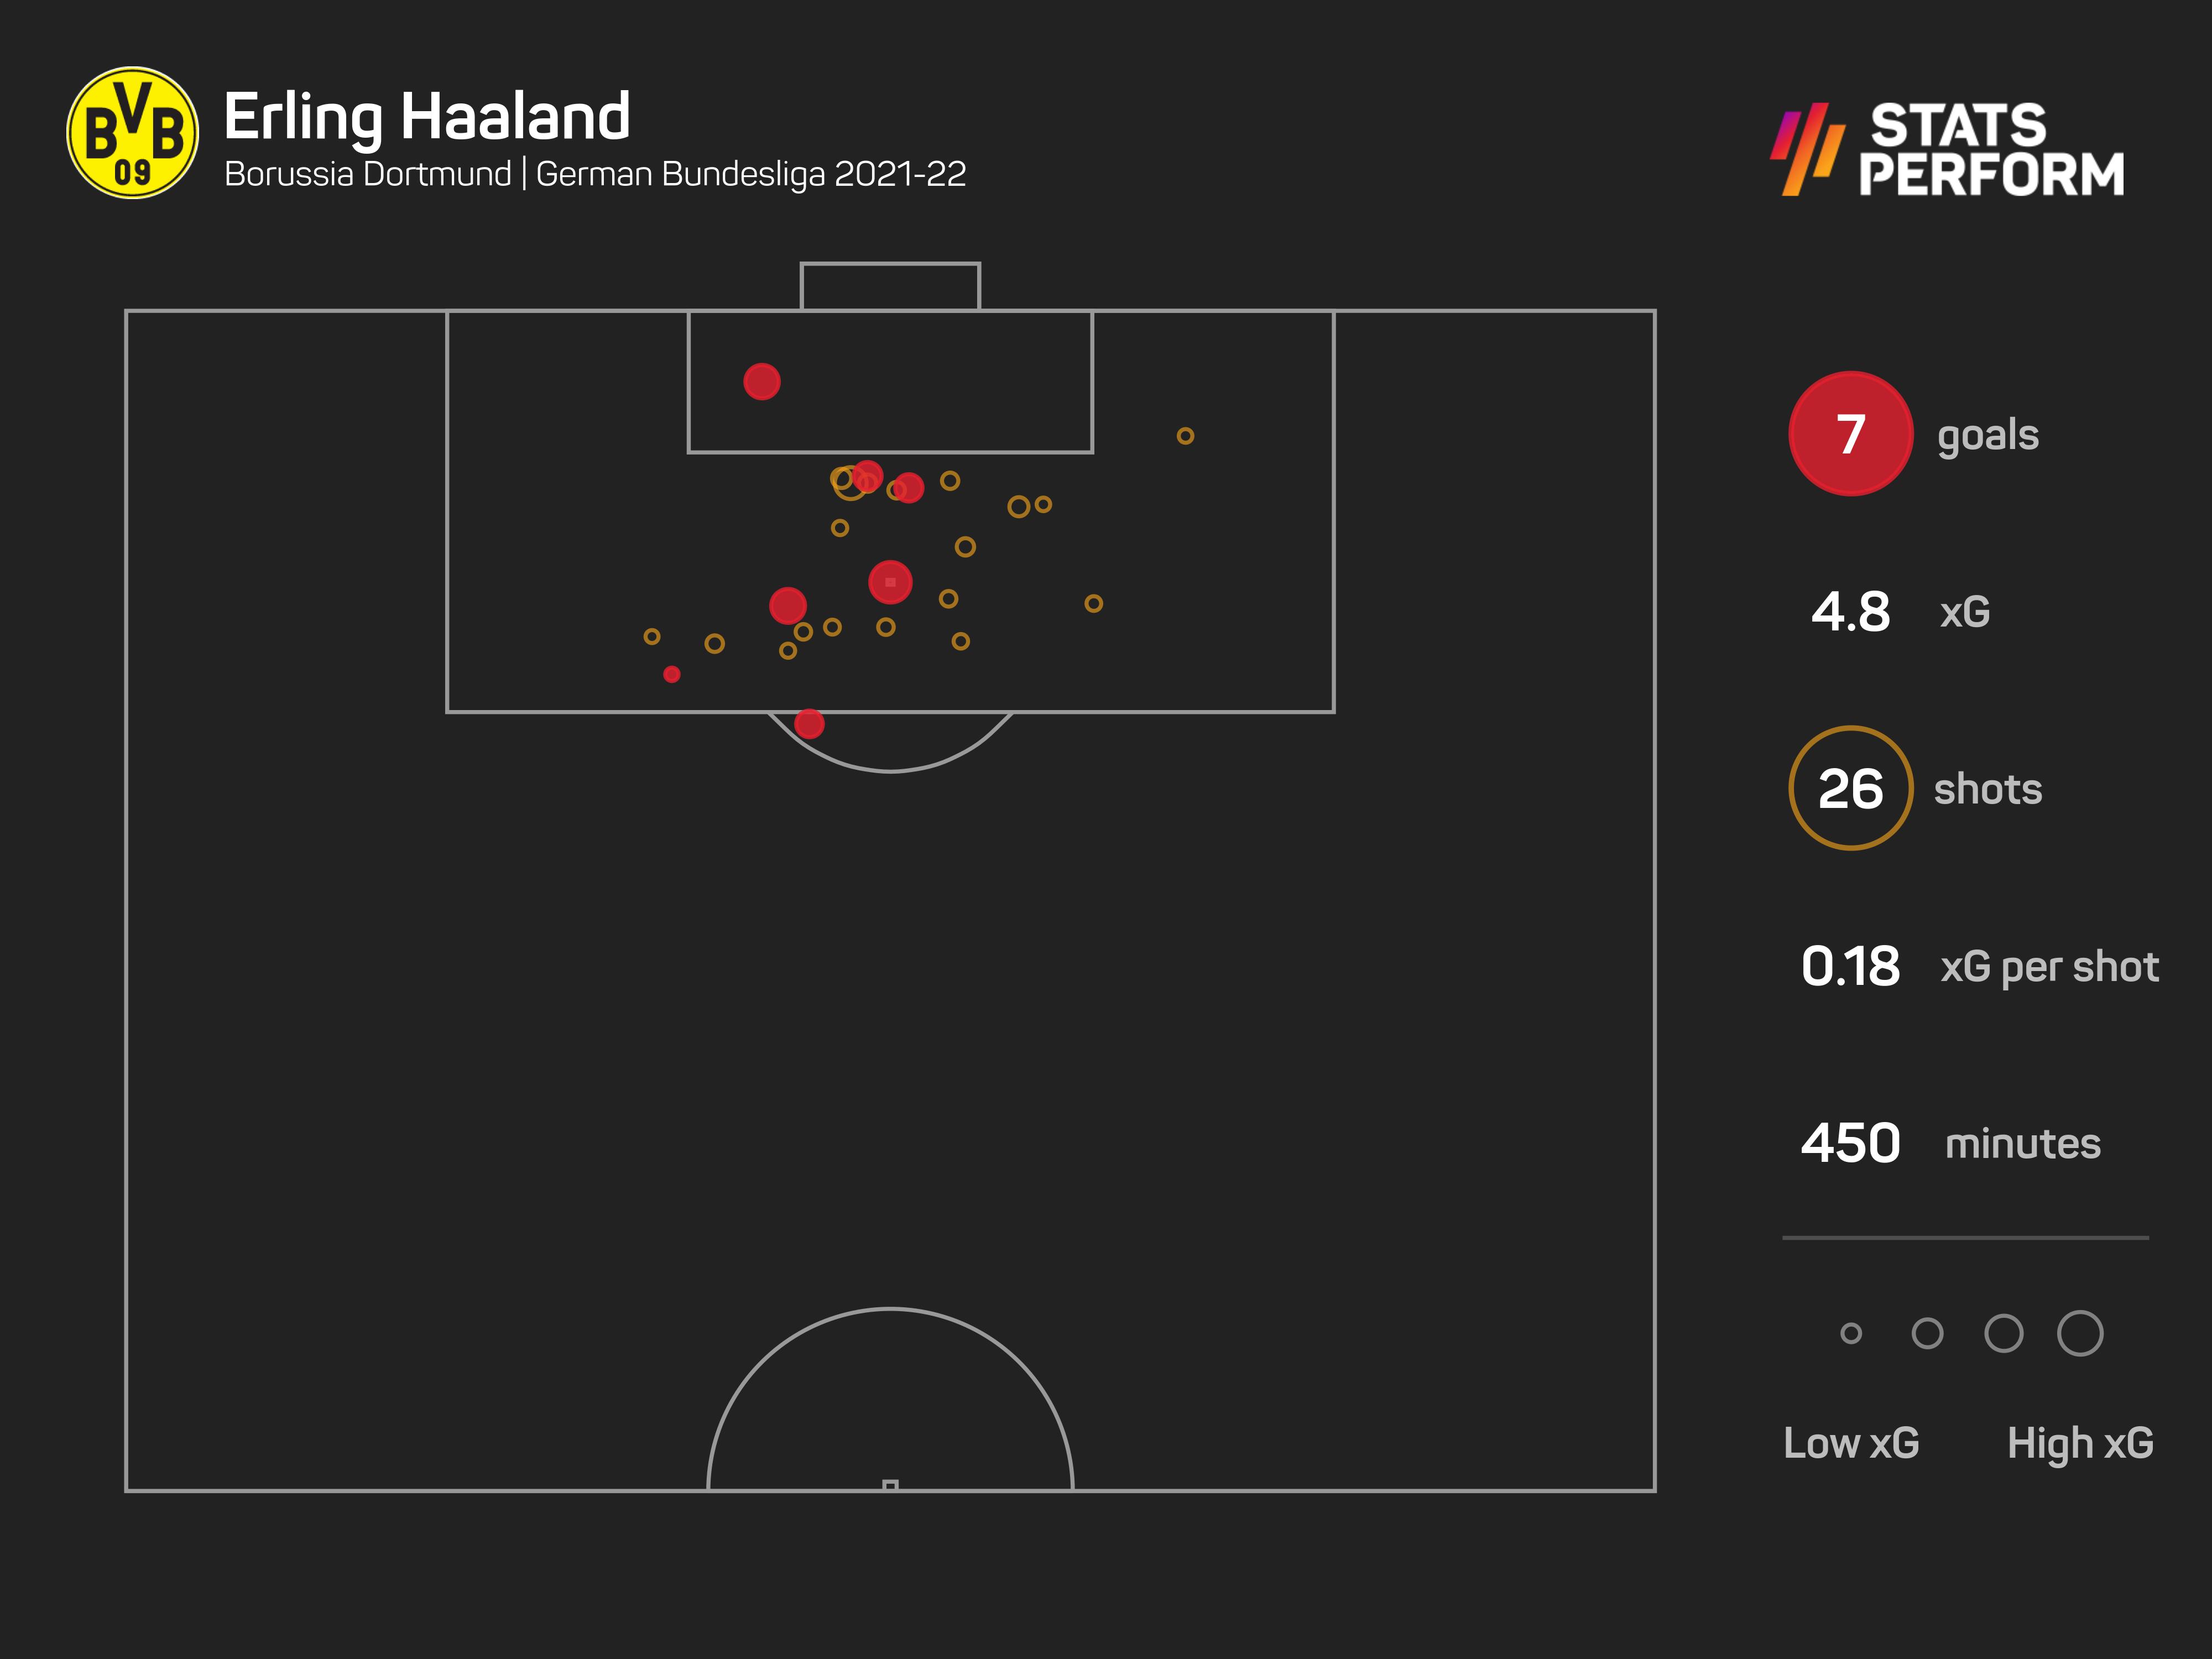 Erling Haaland's finishing has been clinical